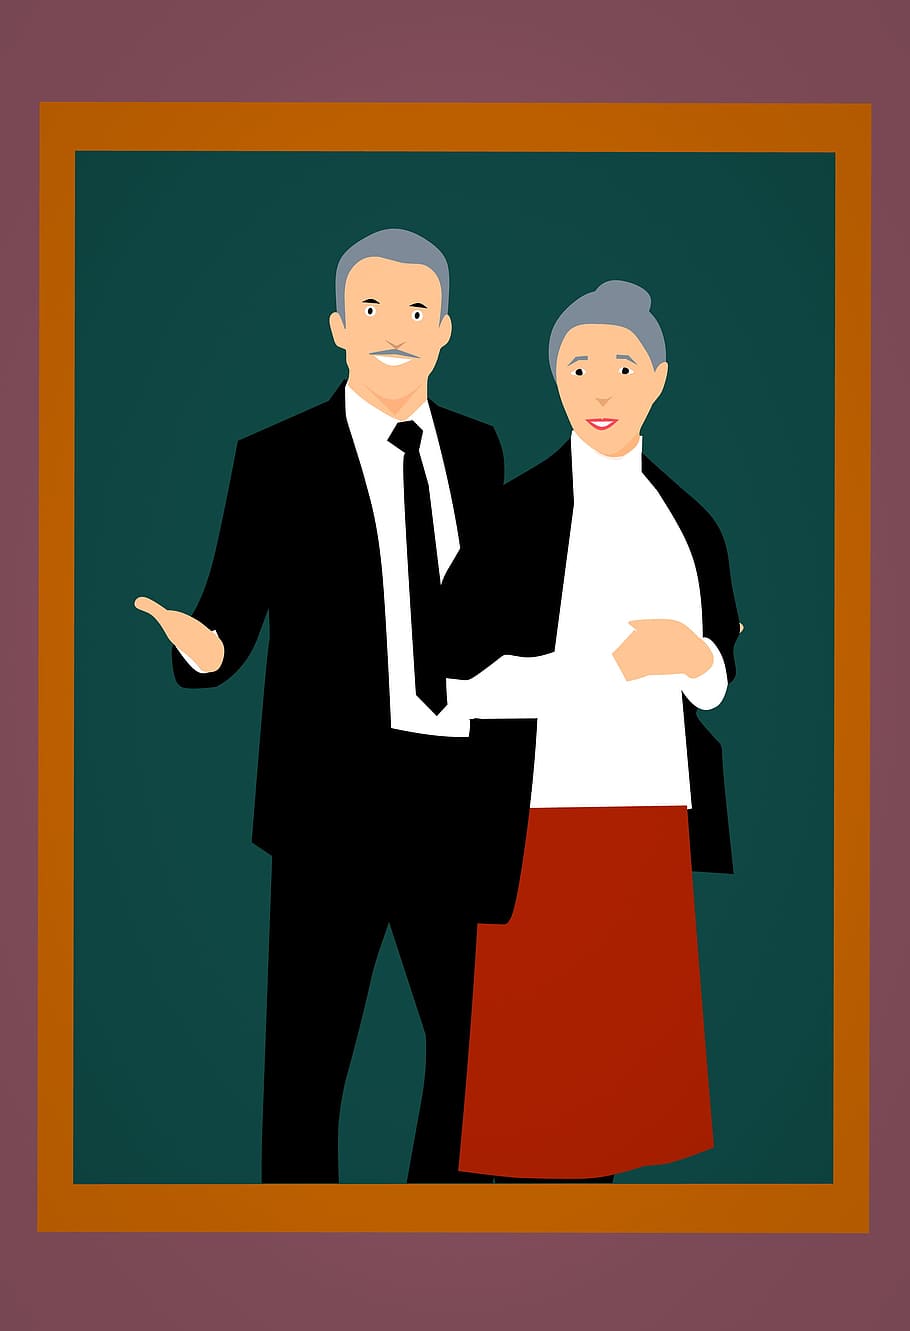 Illustrated portrait of grandparents in a frame., grandfather